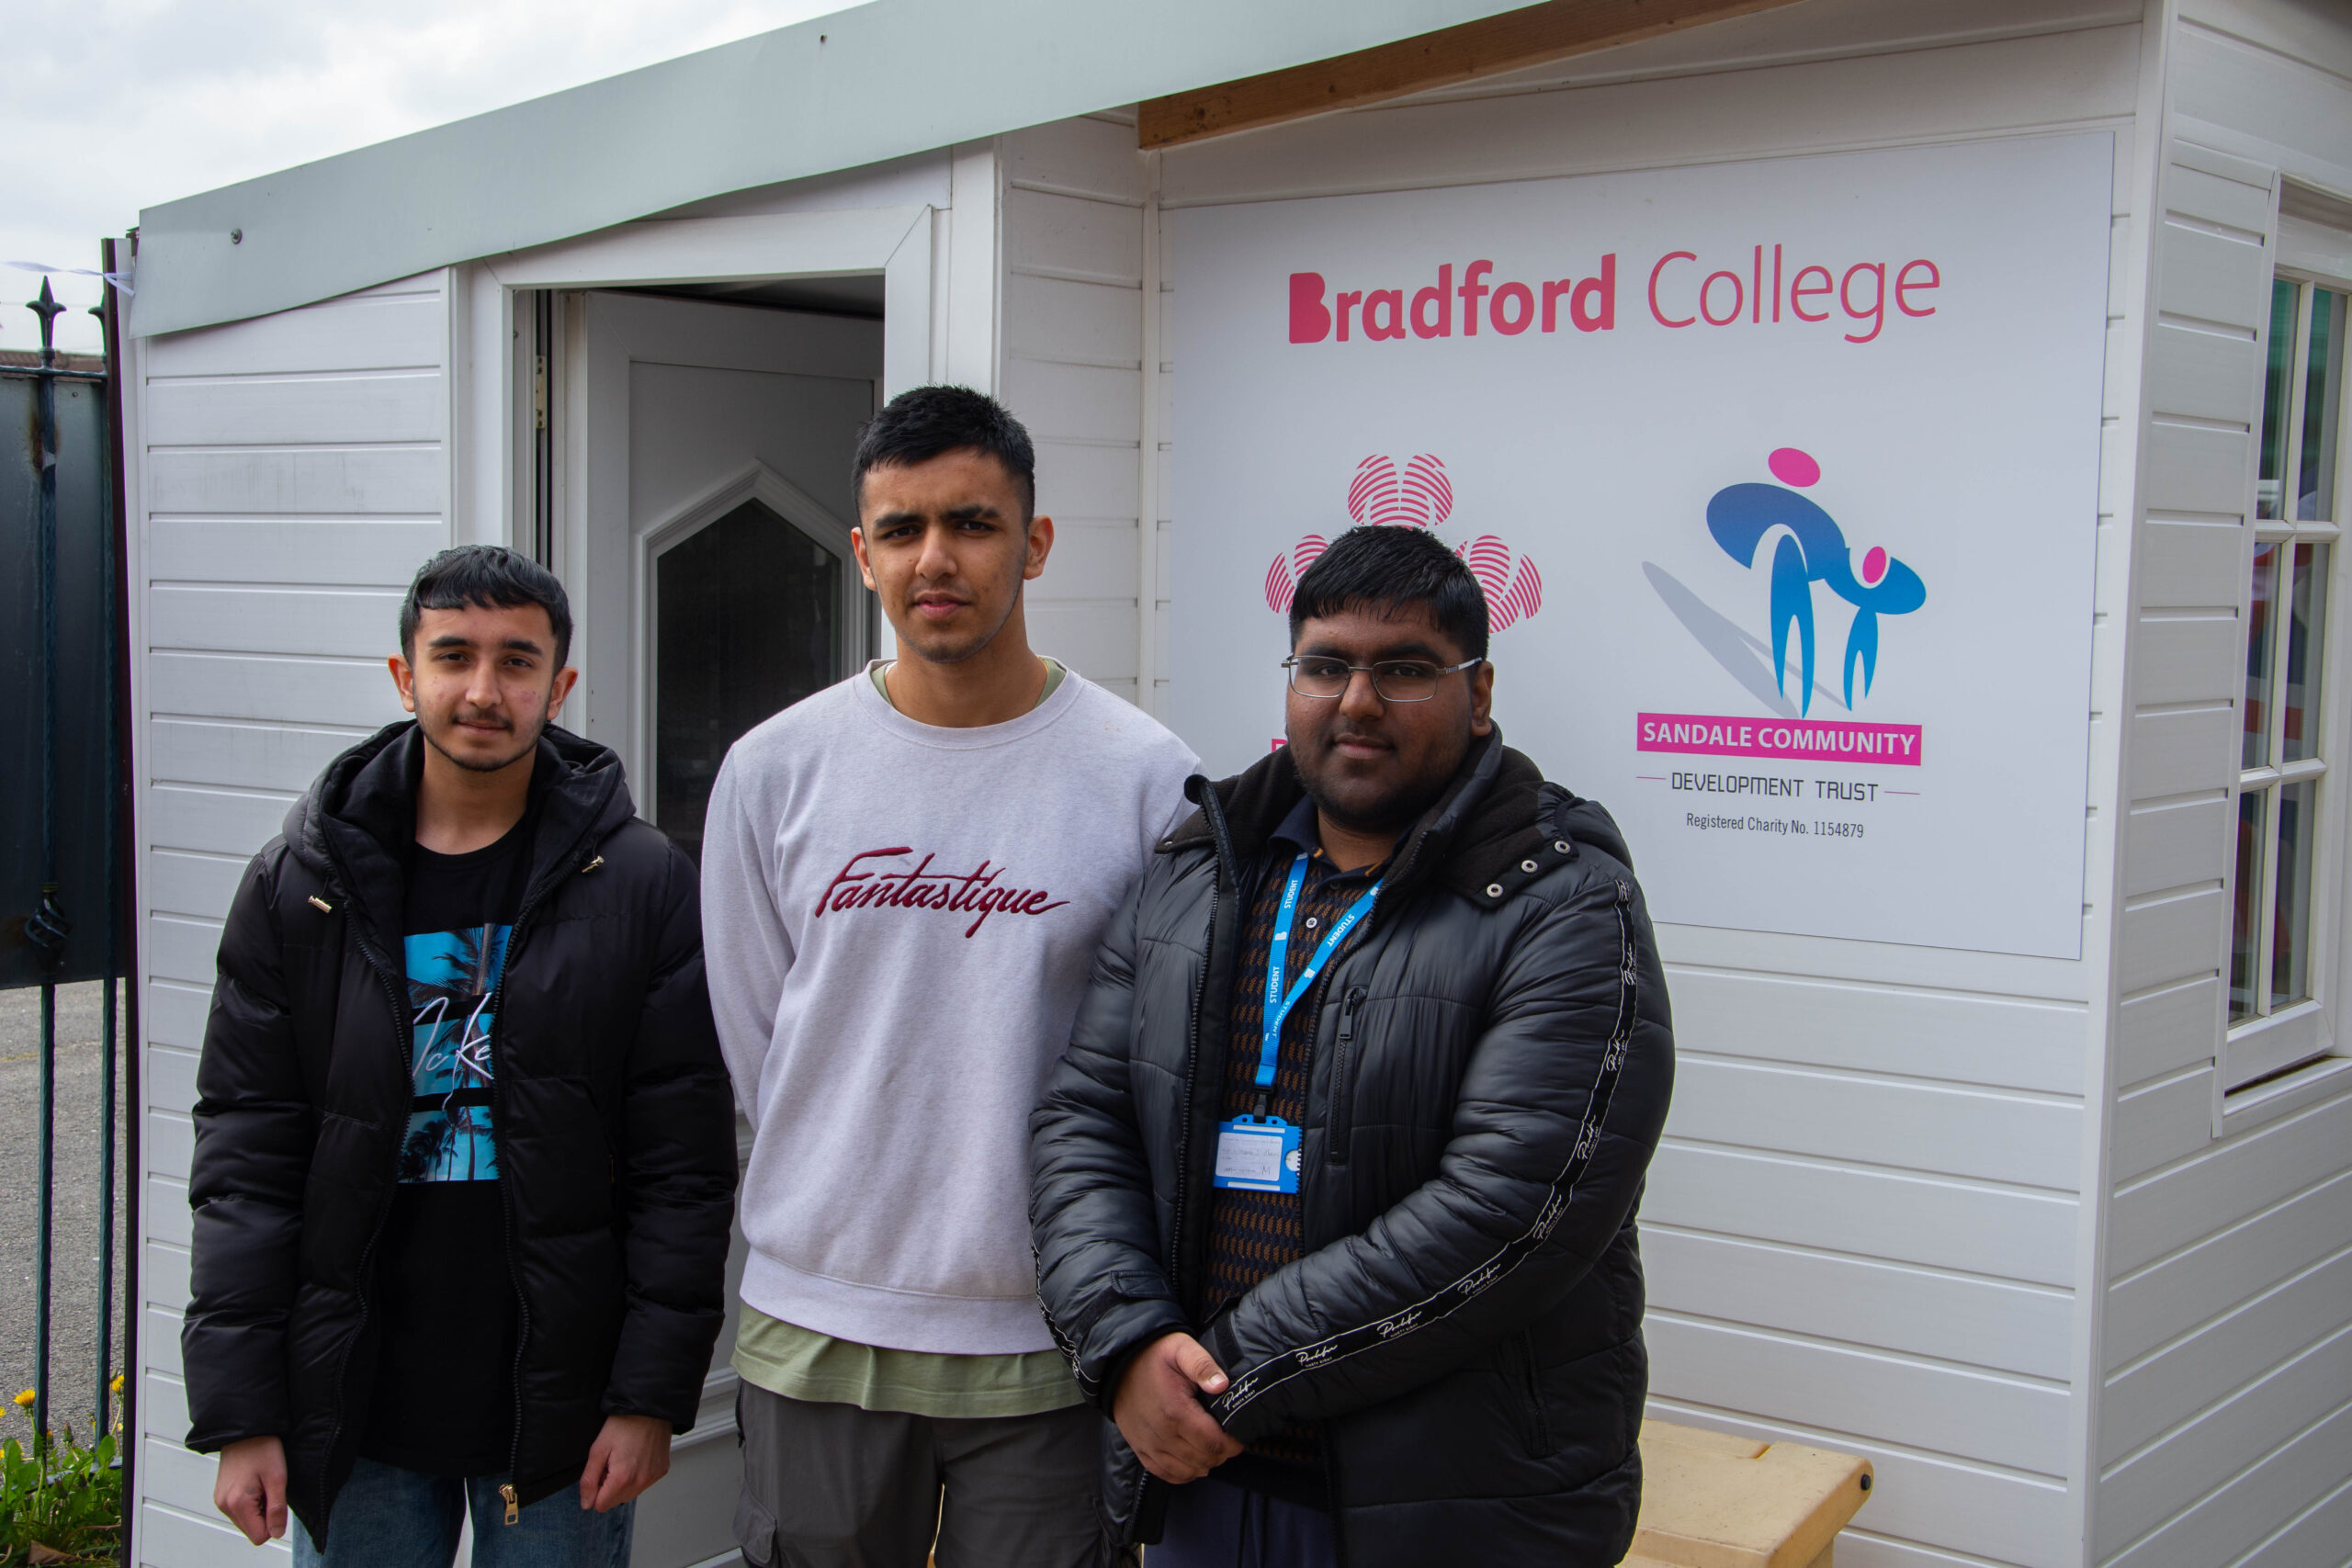 Business students use their expertise to put smiles on faces at the Sandale Trust